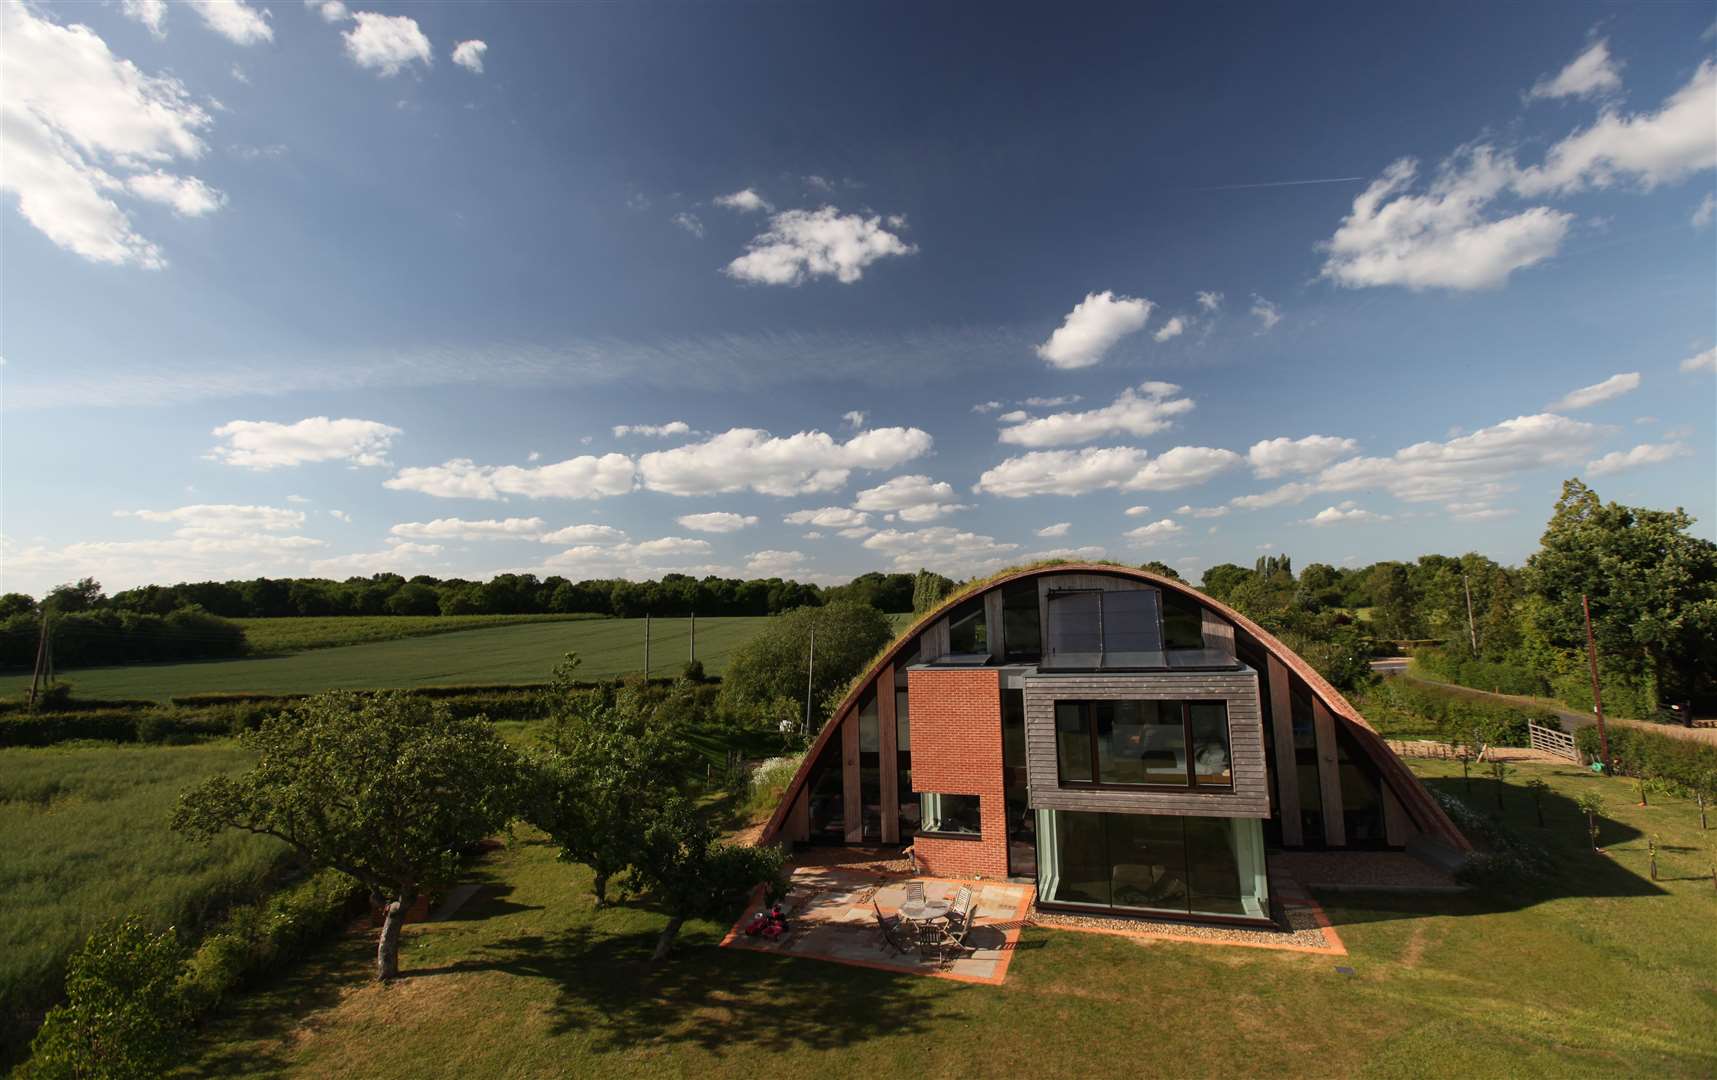 The house featured on Grand Designs. Photo credit: Richard Hawkes